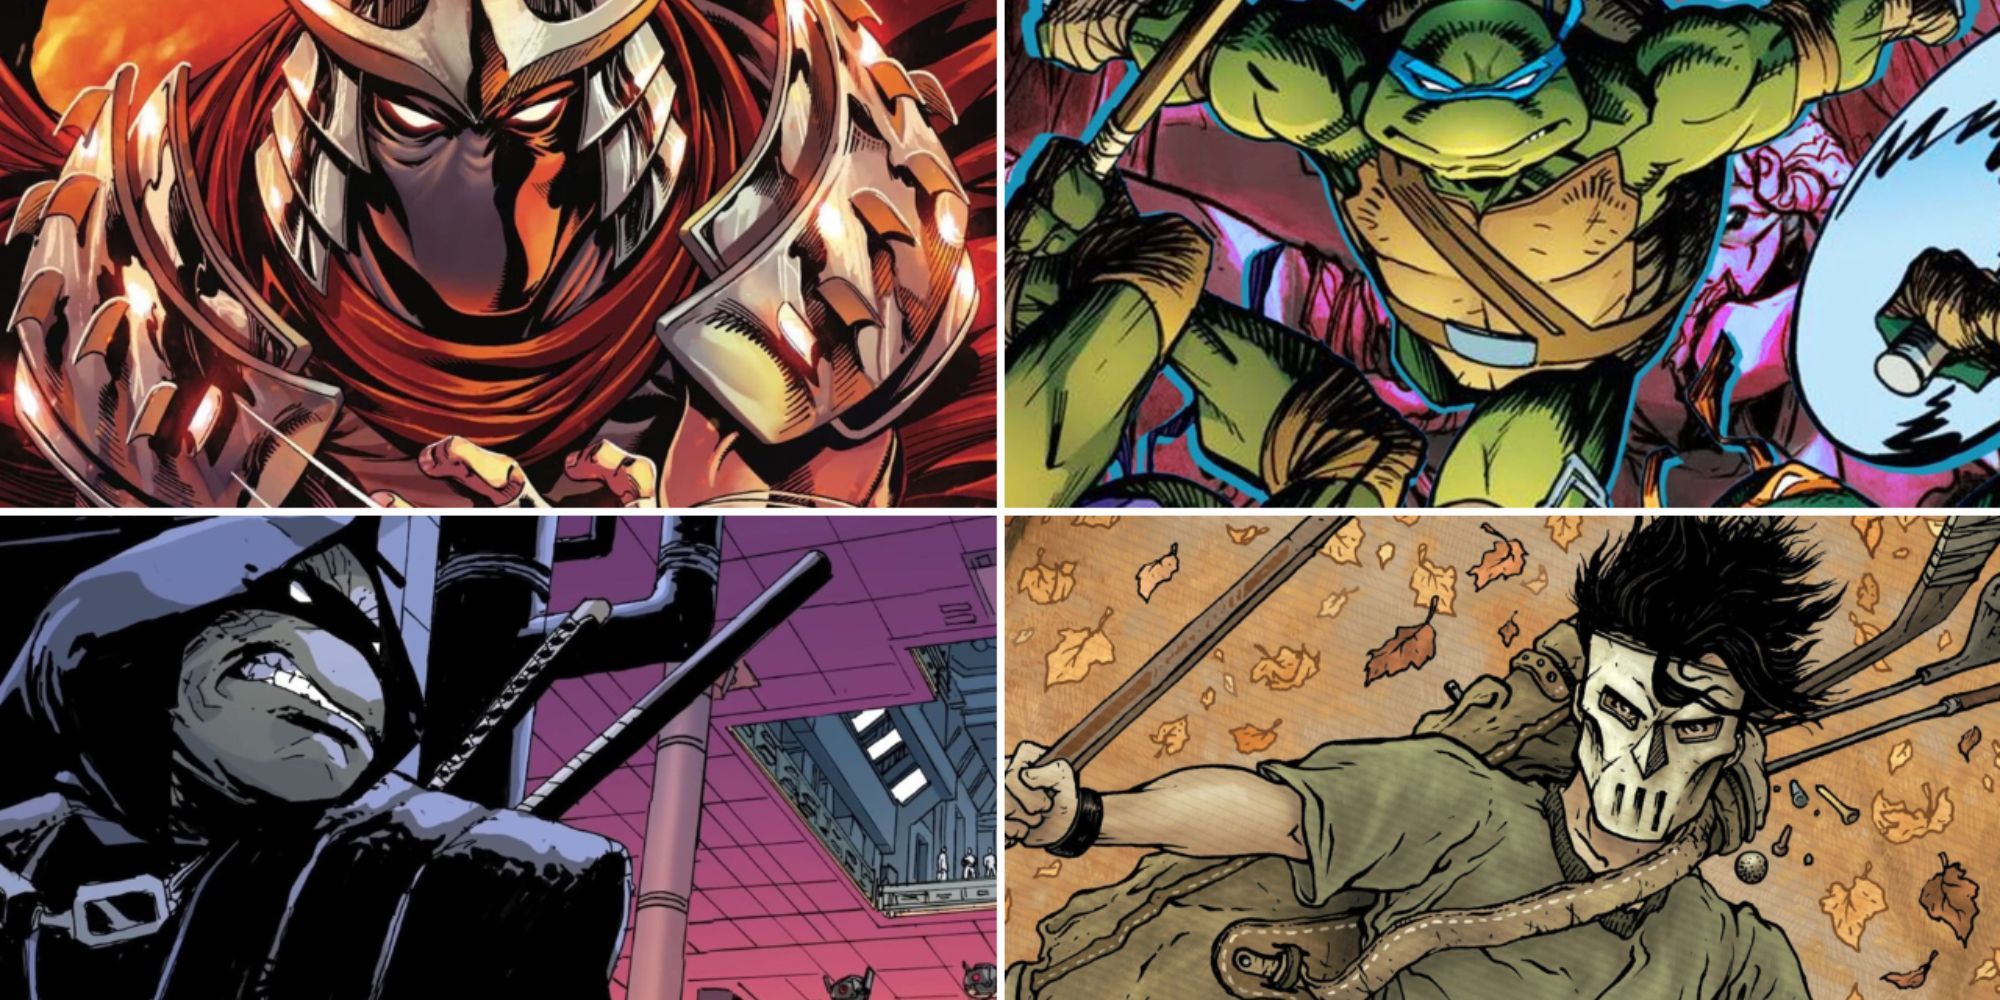 Split image of Leonardo attack enemies, Michelangelo wearing black hiding behind a wall, Casey Jones with a stick, and a close up of Shredder from TMNT